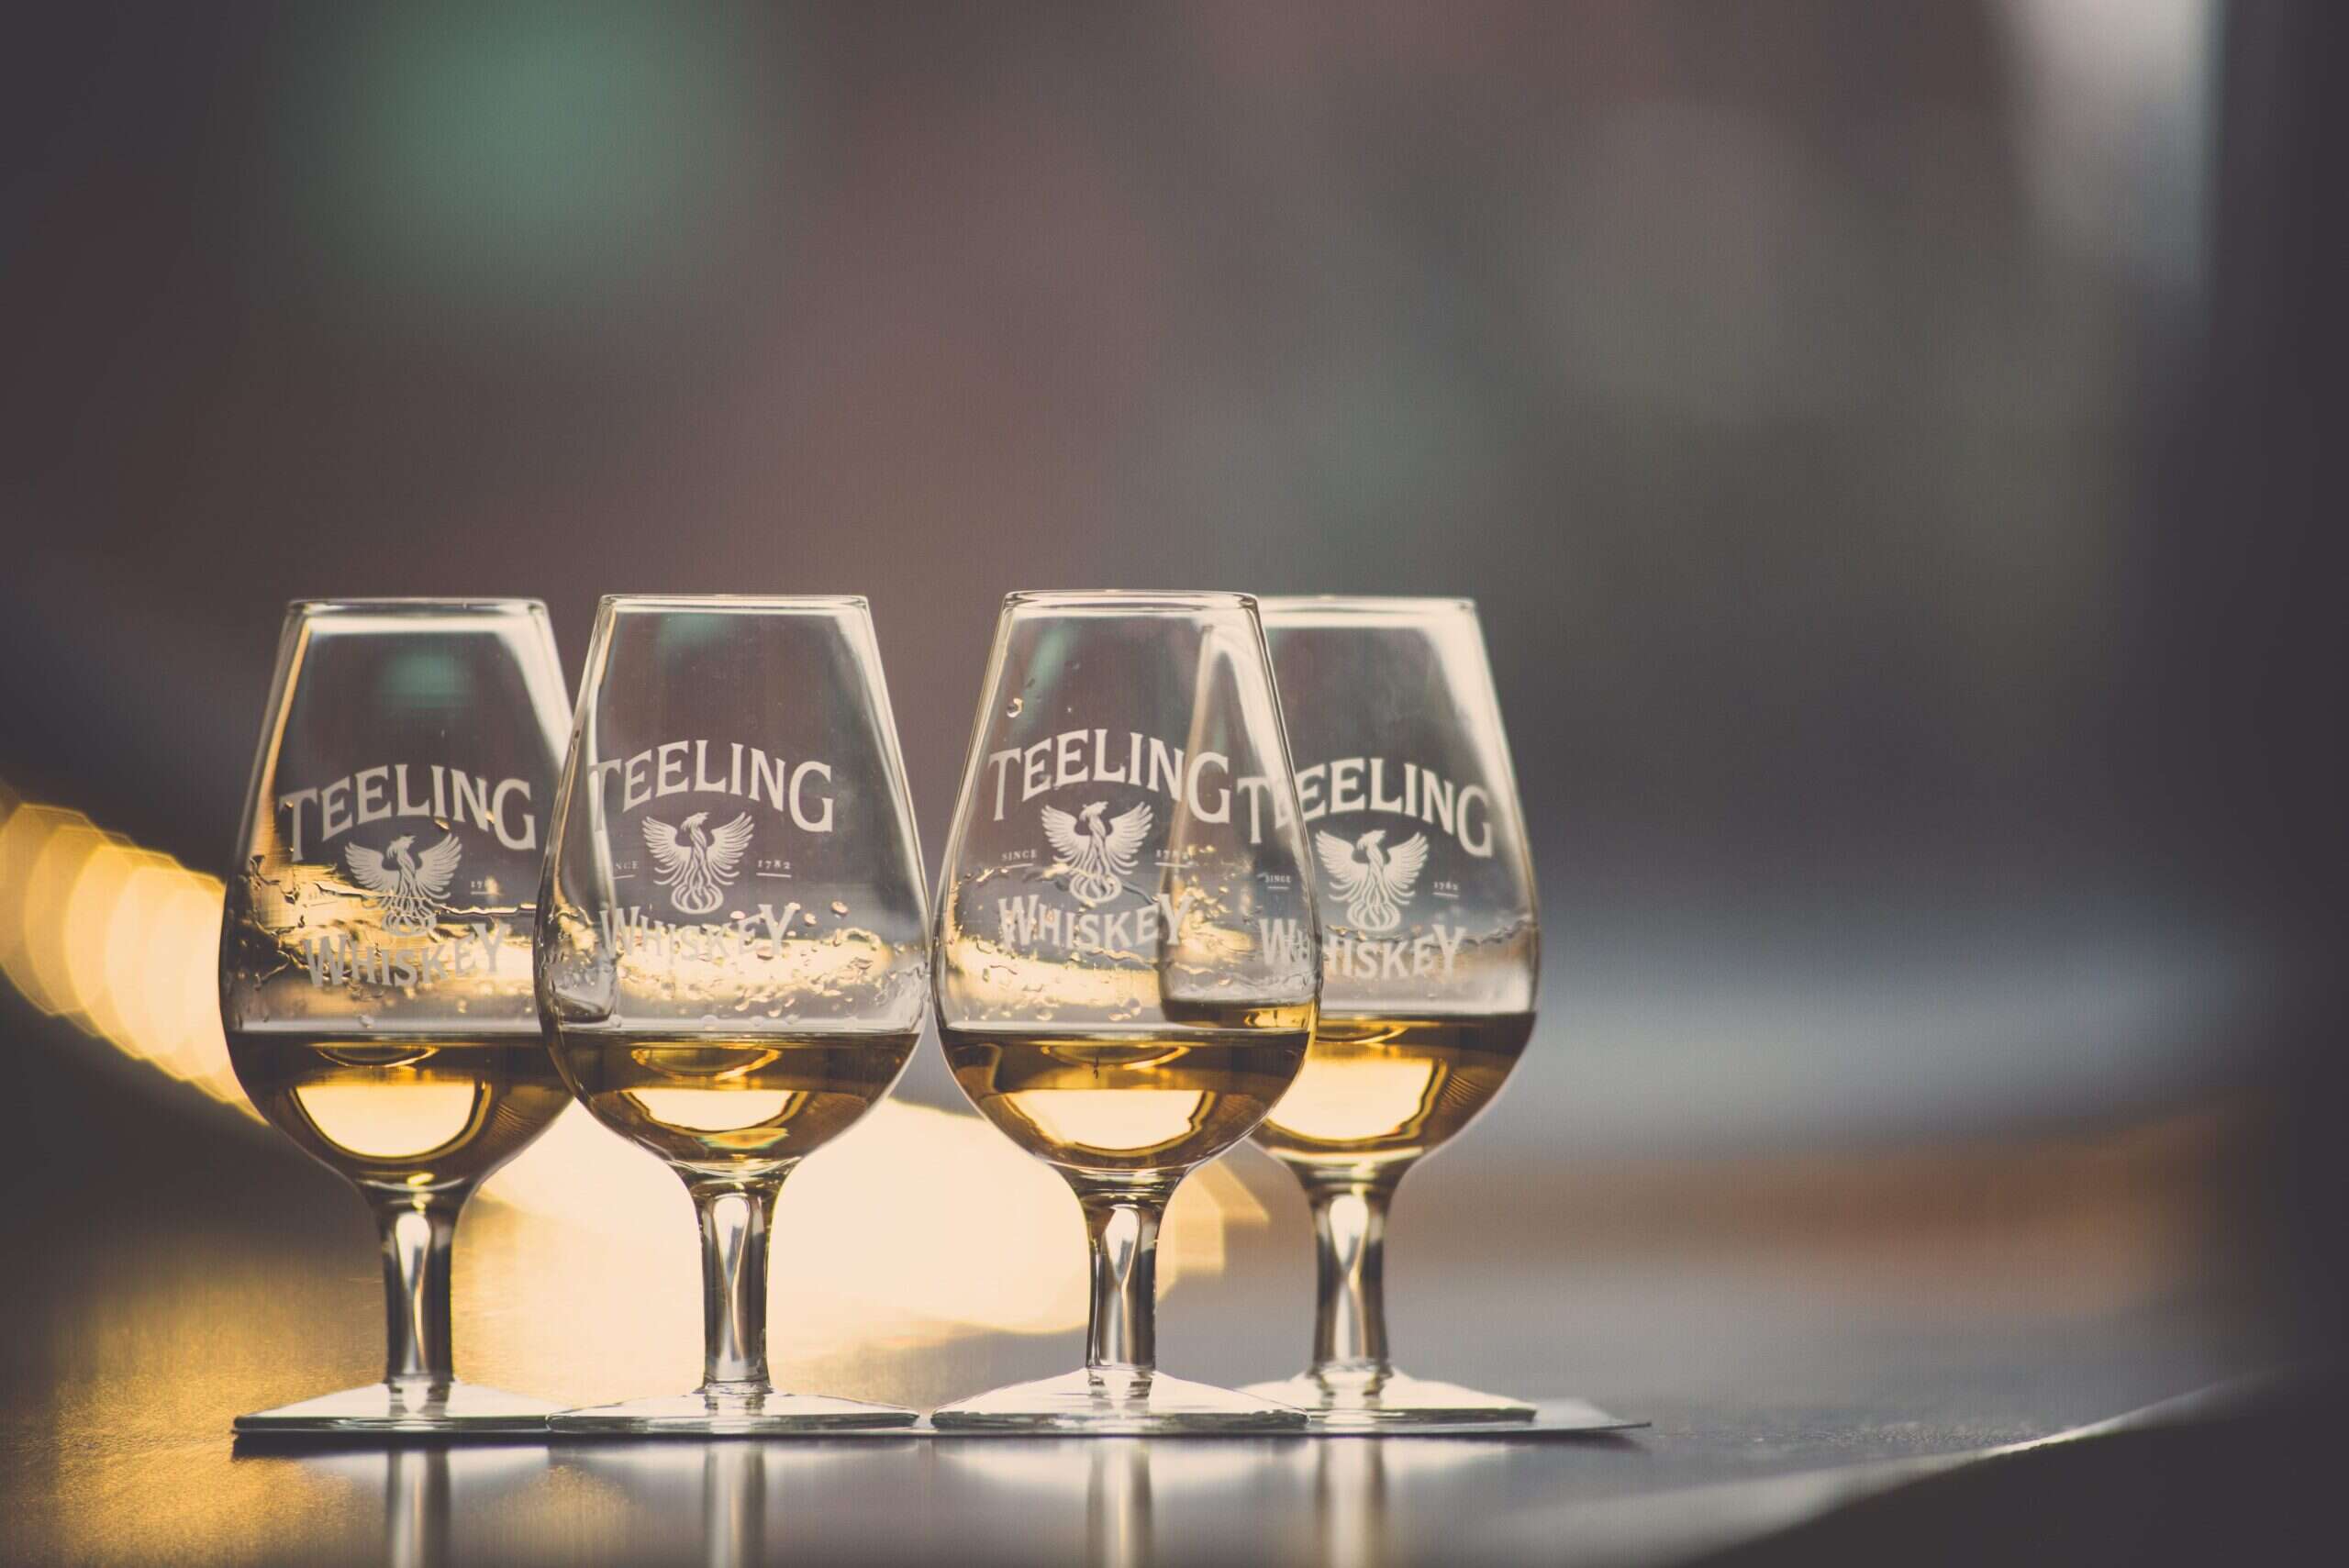 teeling is one of the best irish whiskey brands in the world